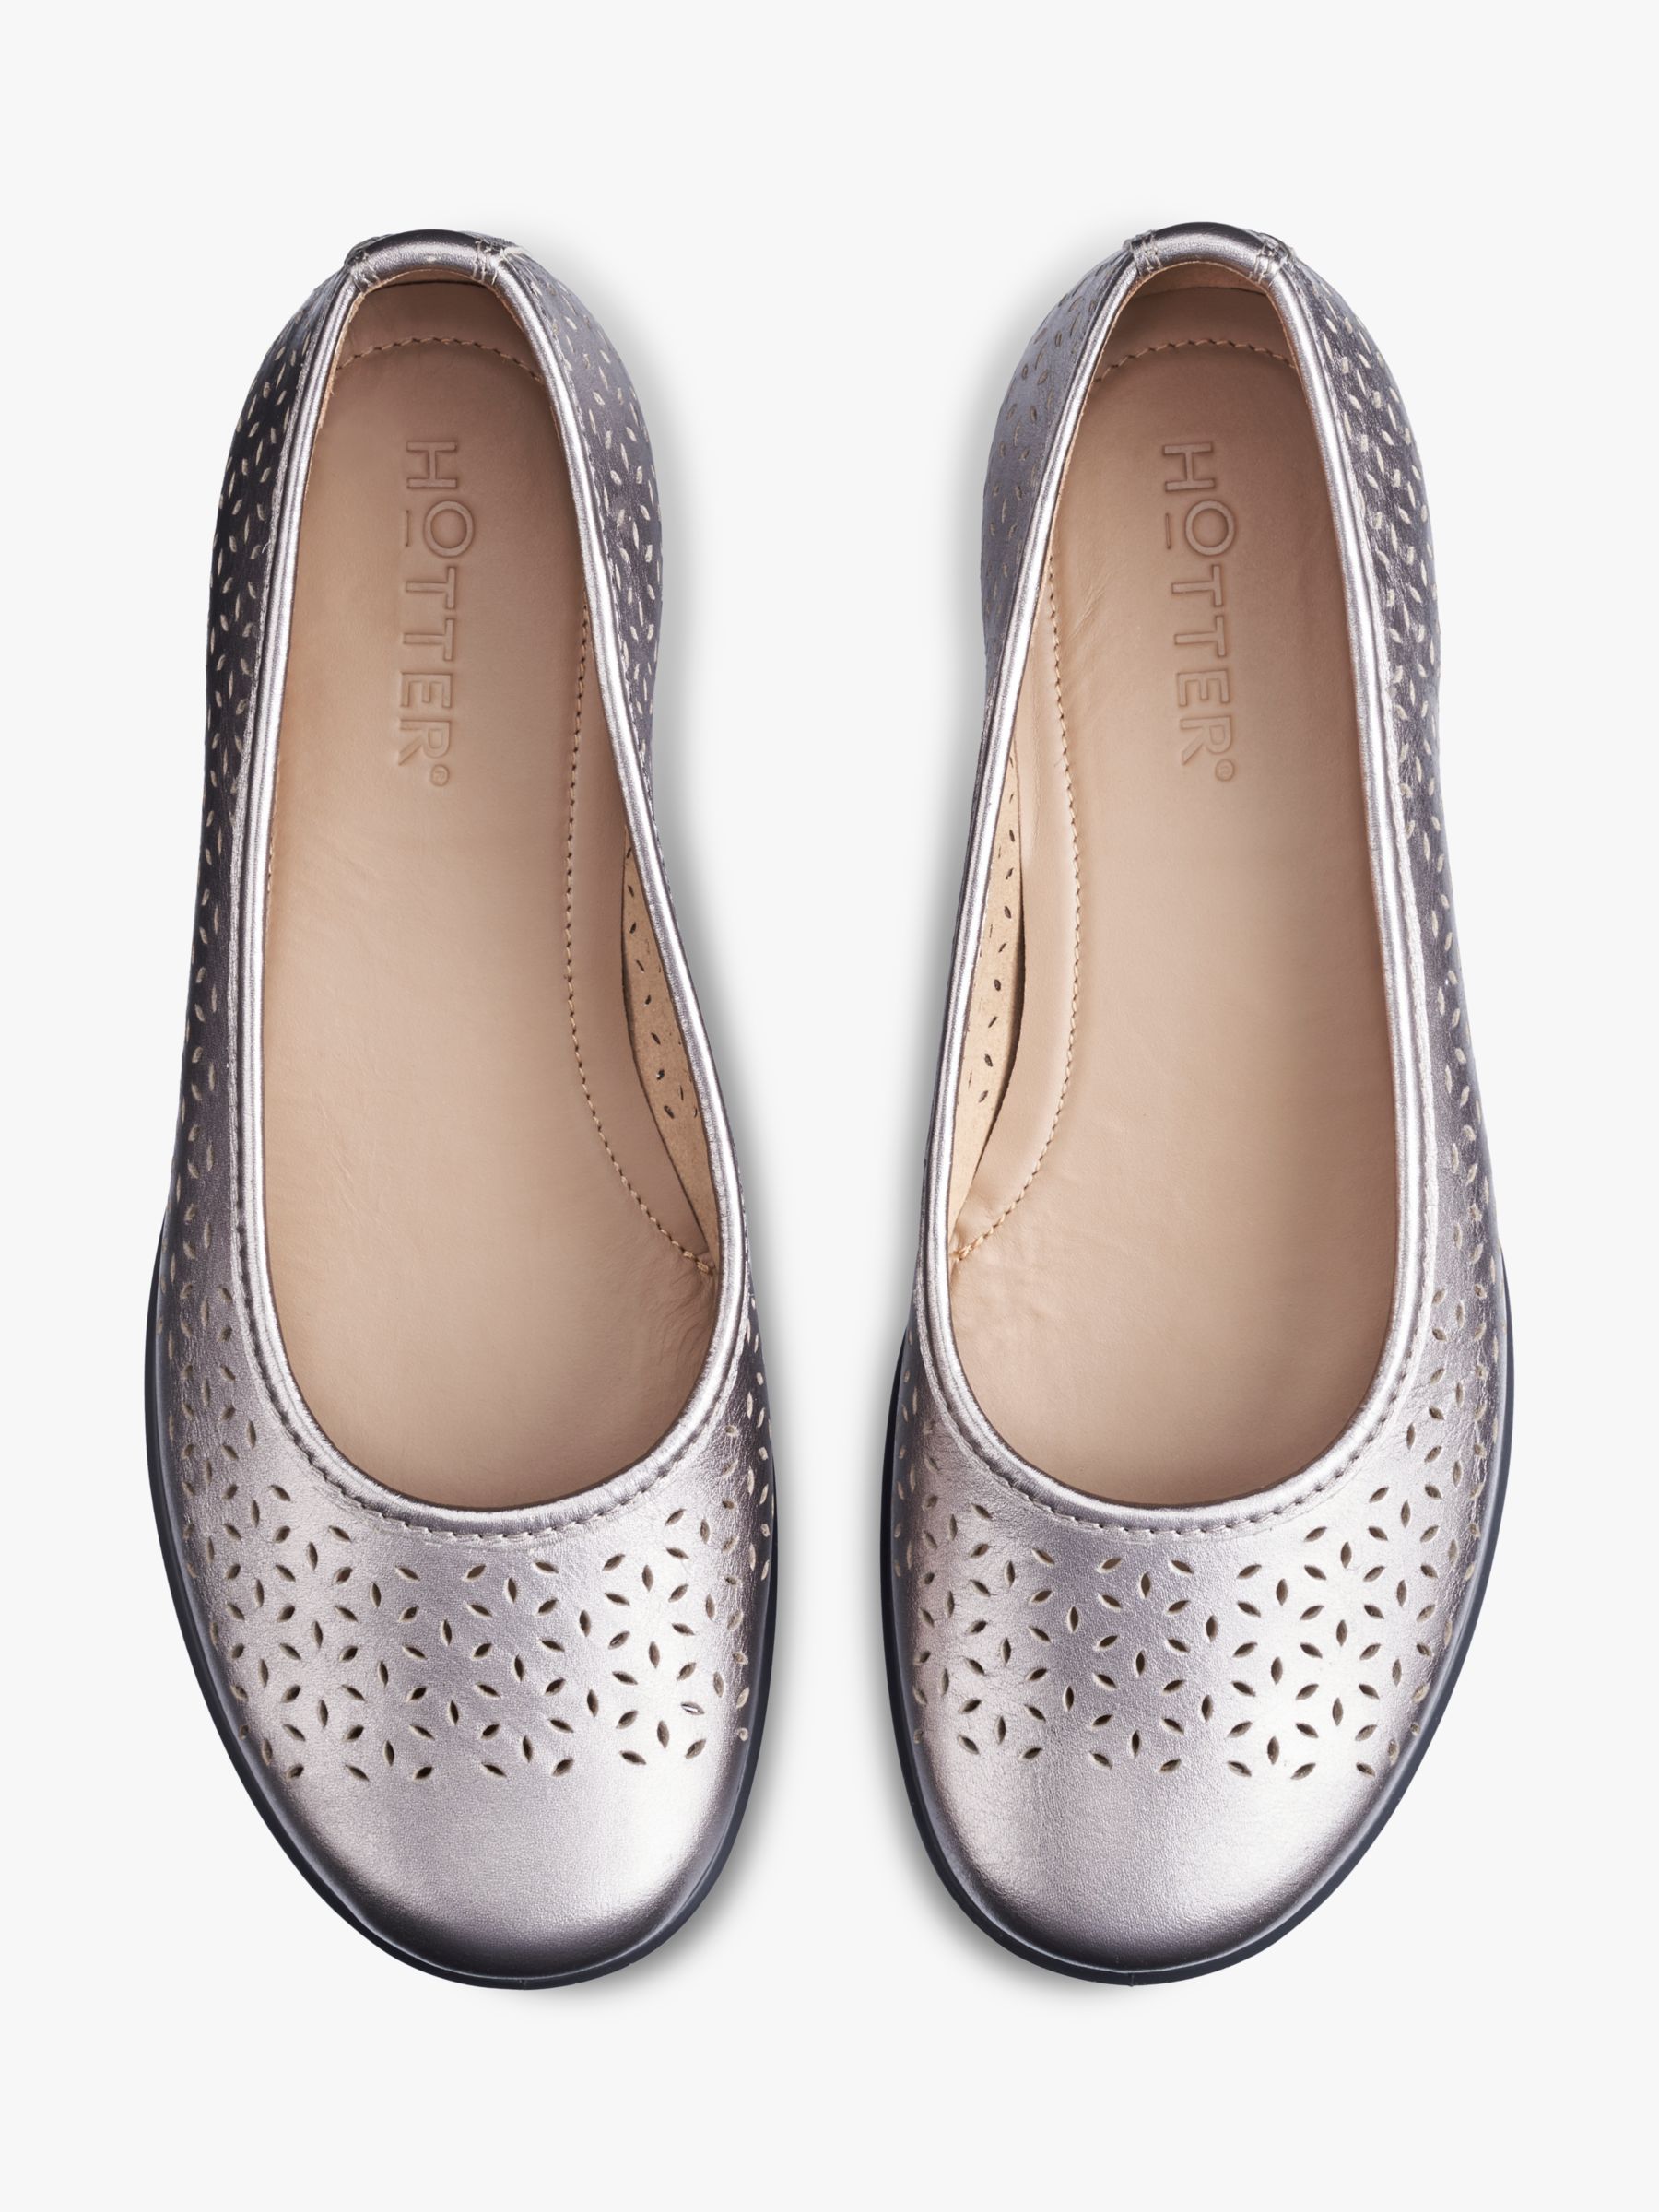 Hotter Livvy II Wide Fit Perforated Leather Pumps, Pewter, 5